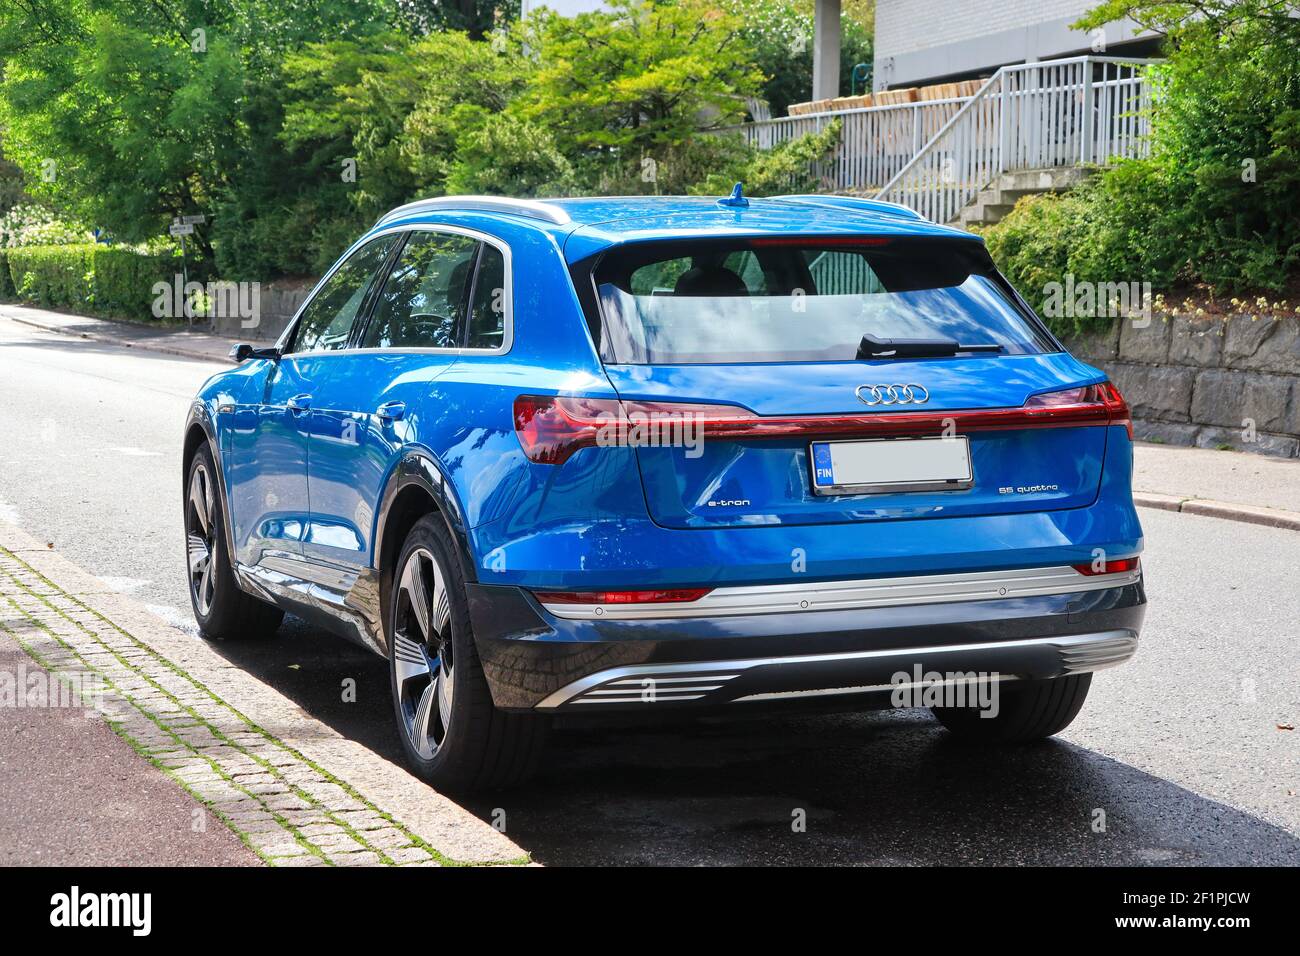 Blue Audi E-tron 55 Quattro, fully-electric mid-size luxury crossover SUV produced by Audi, parked by street. Helsinki, Finland. August 24, 2020. Stock Photo